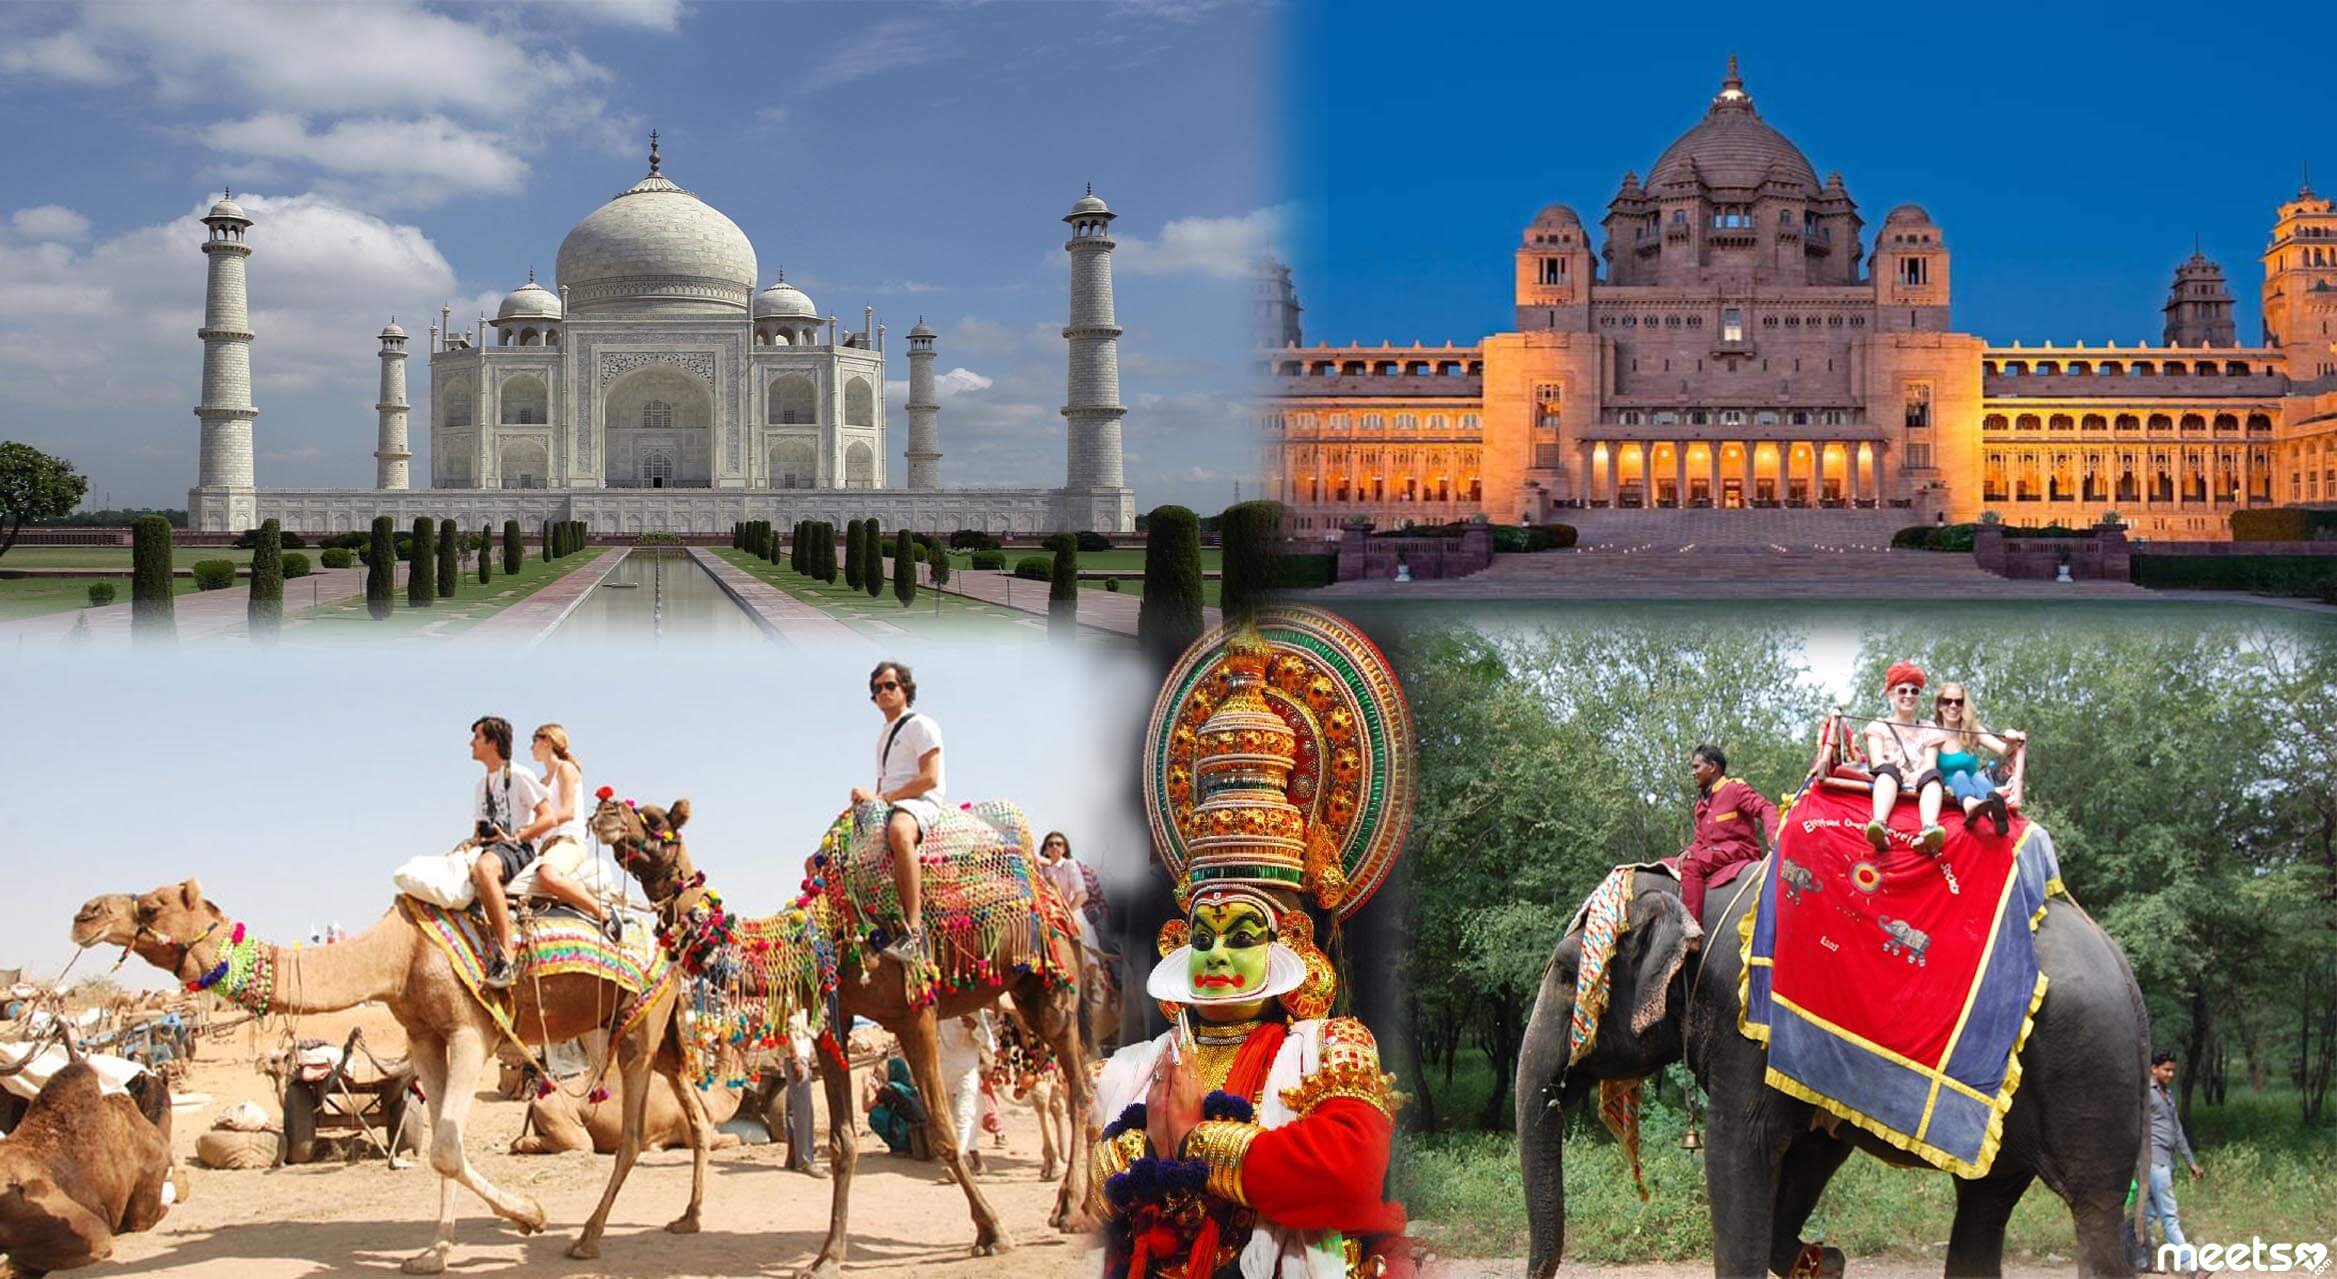 travel opportunity in india